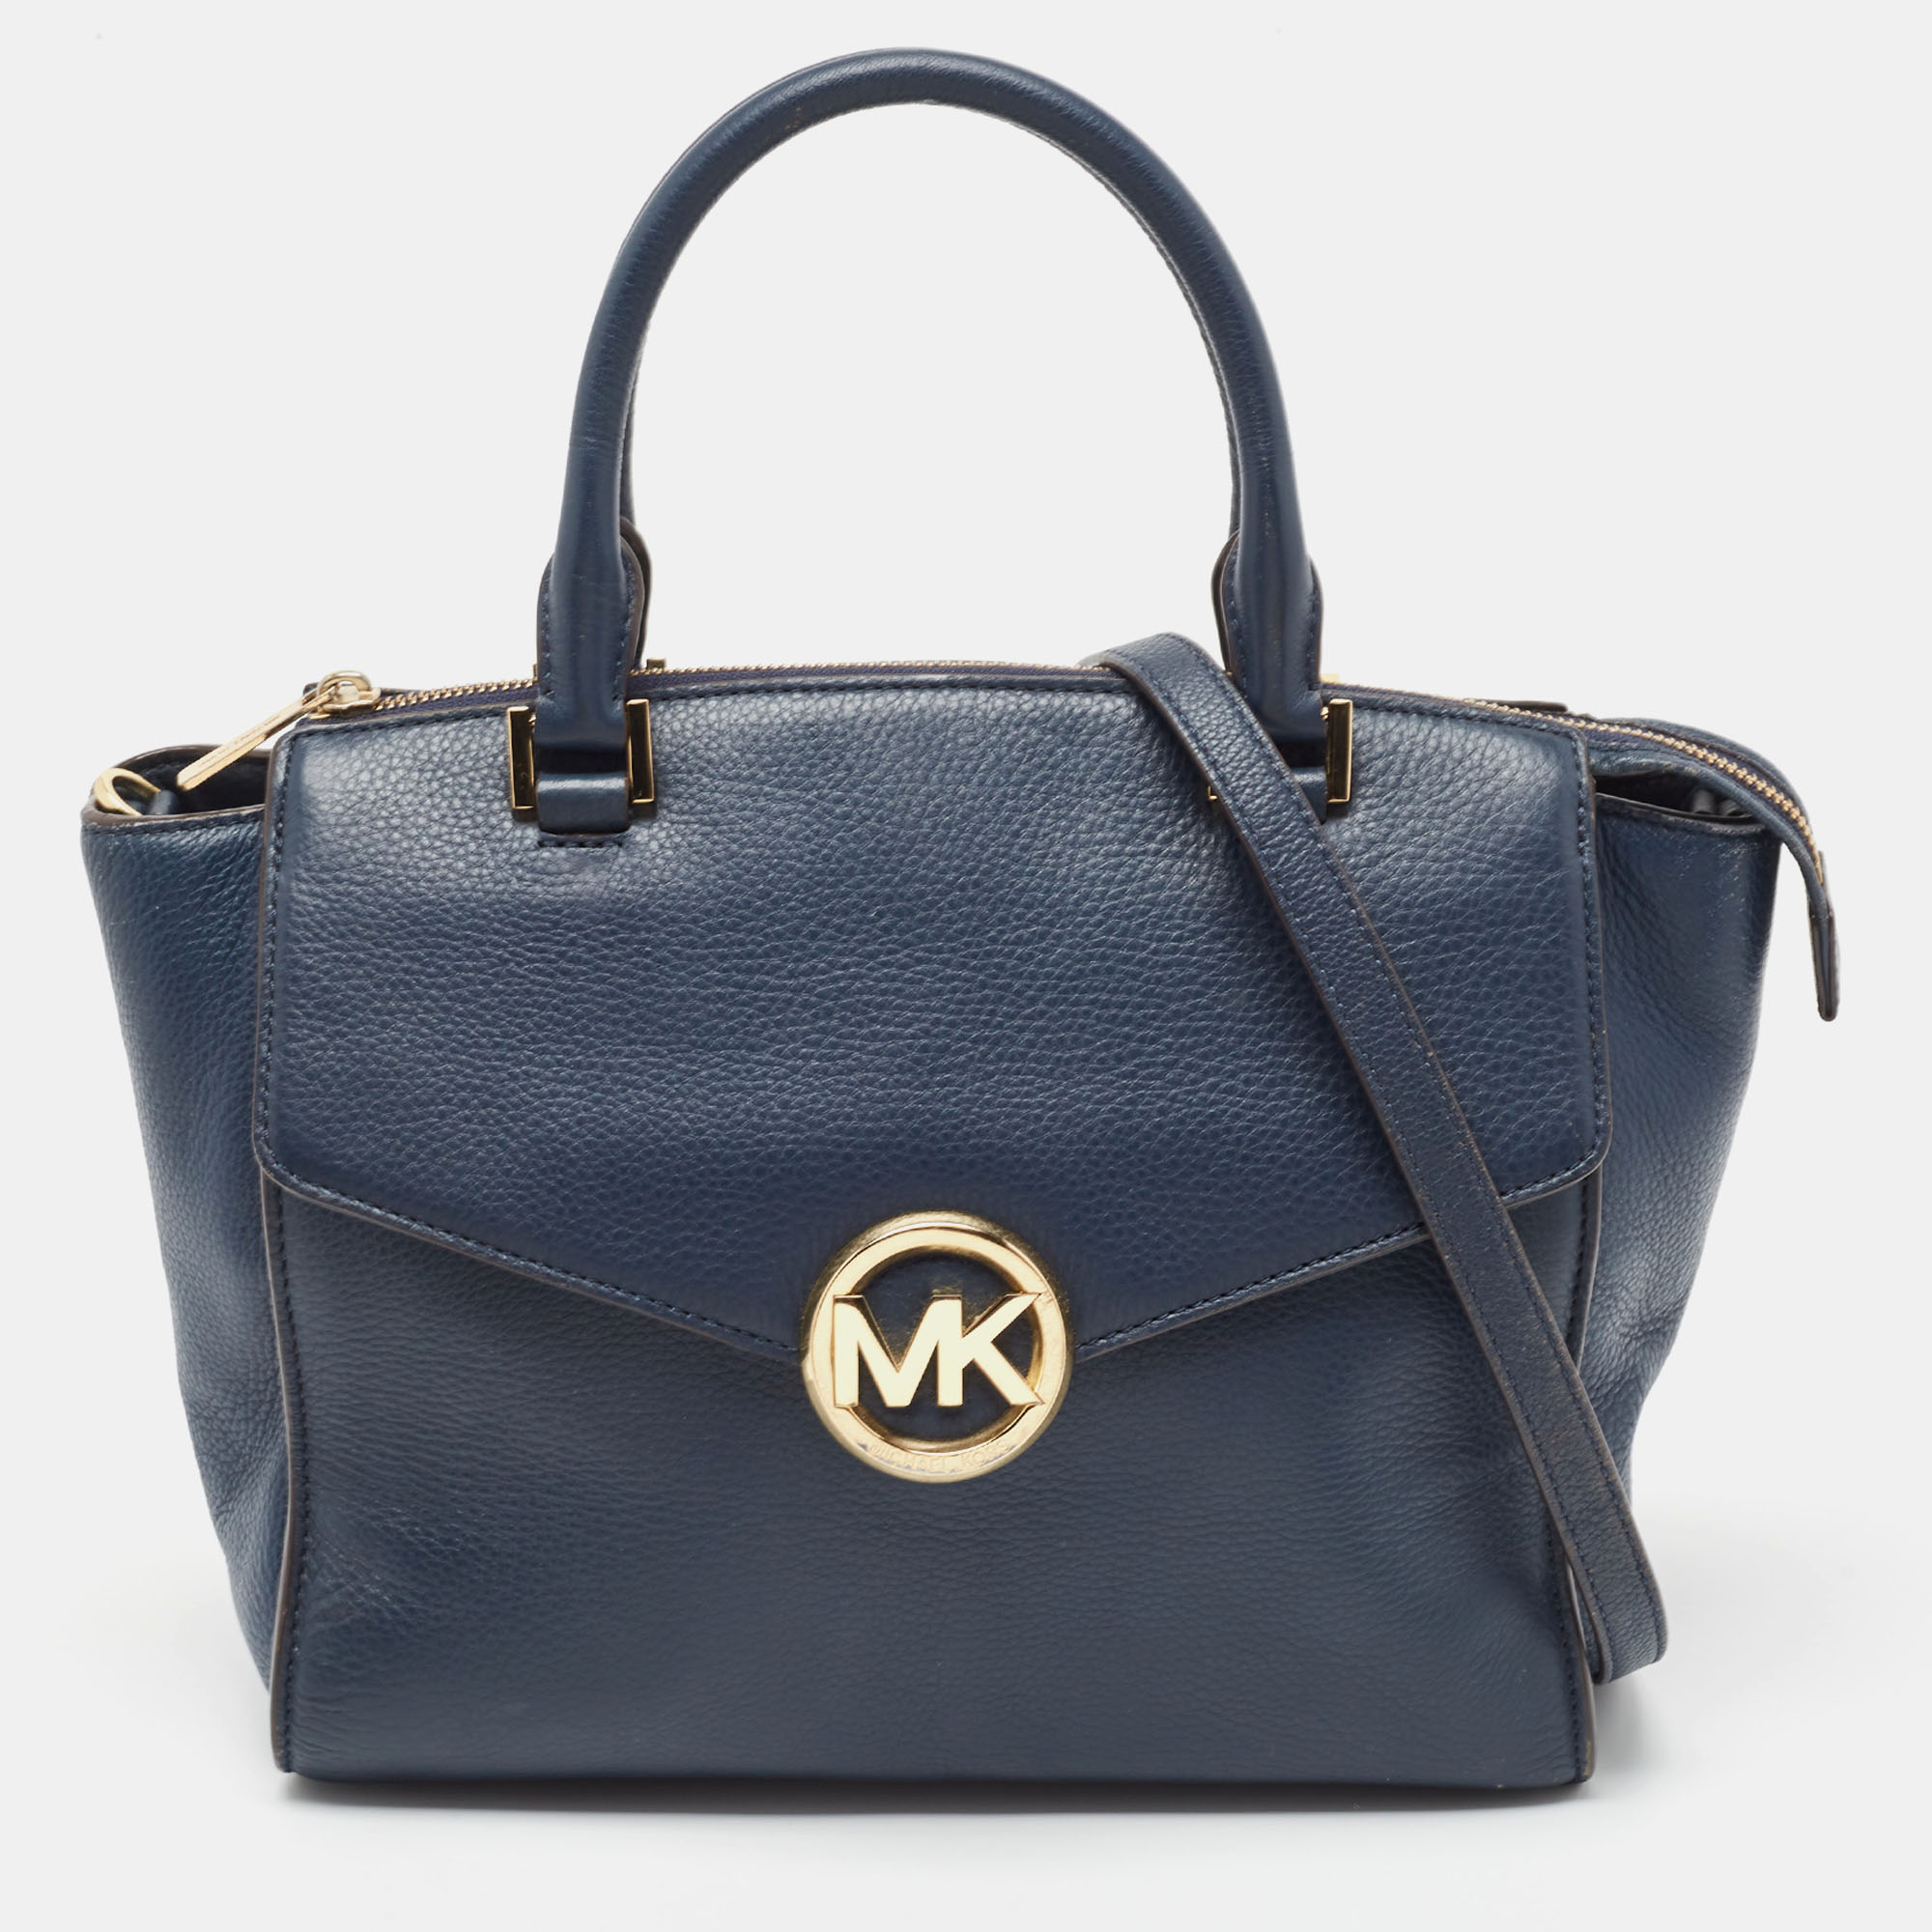 Presenting a stylish leather satchel to own this season. The nylon lined interior of this handbag offers ample space for all your essentials. A must have in your collection this bag from MICHAEL Michael Kors will reflect your fabulous fashion choices.